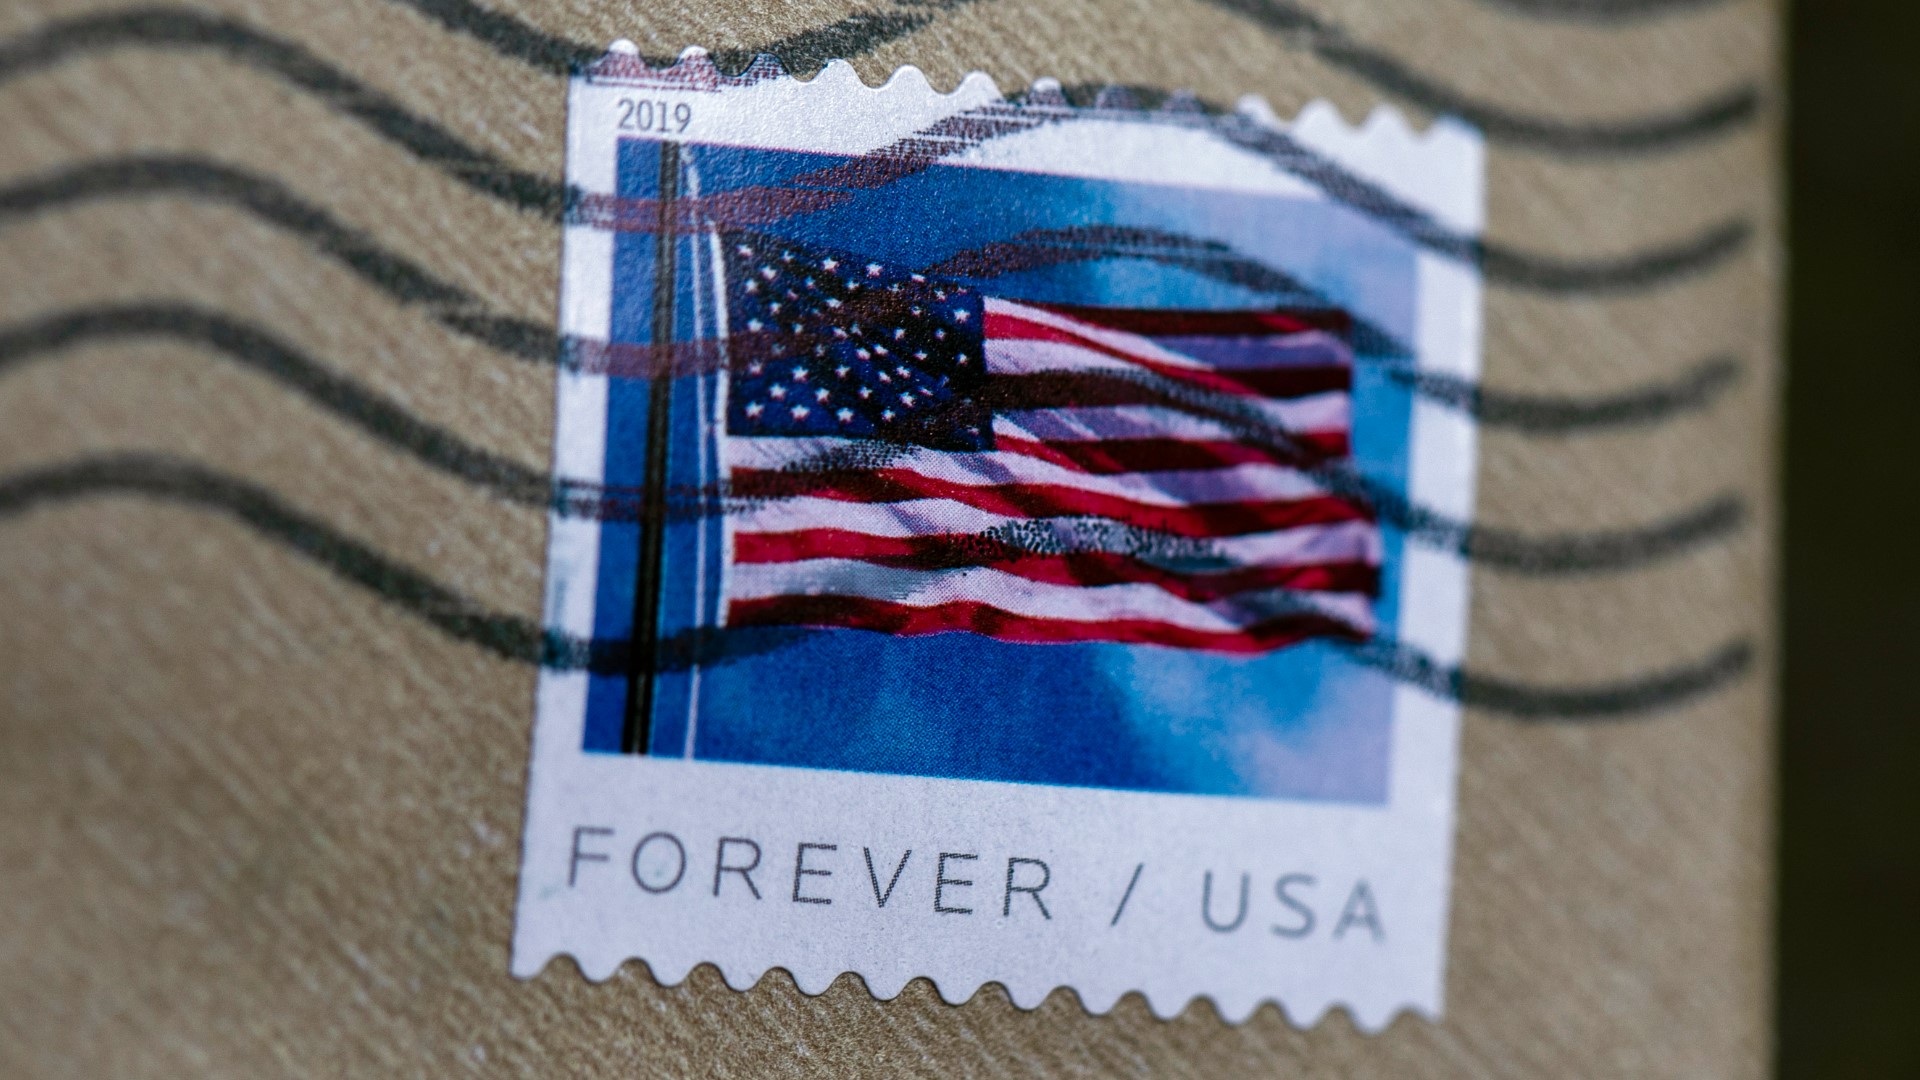 Forever Stamps to cost a bit more starting Sunday